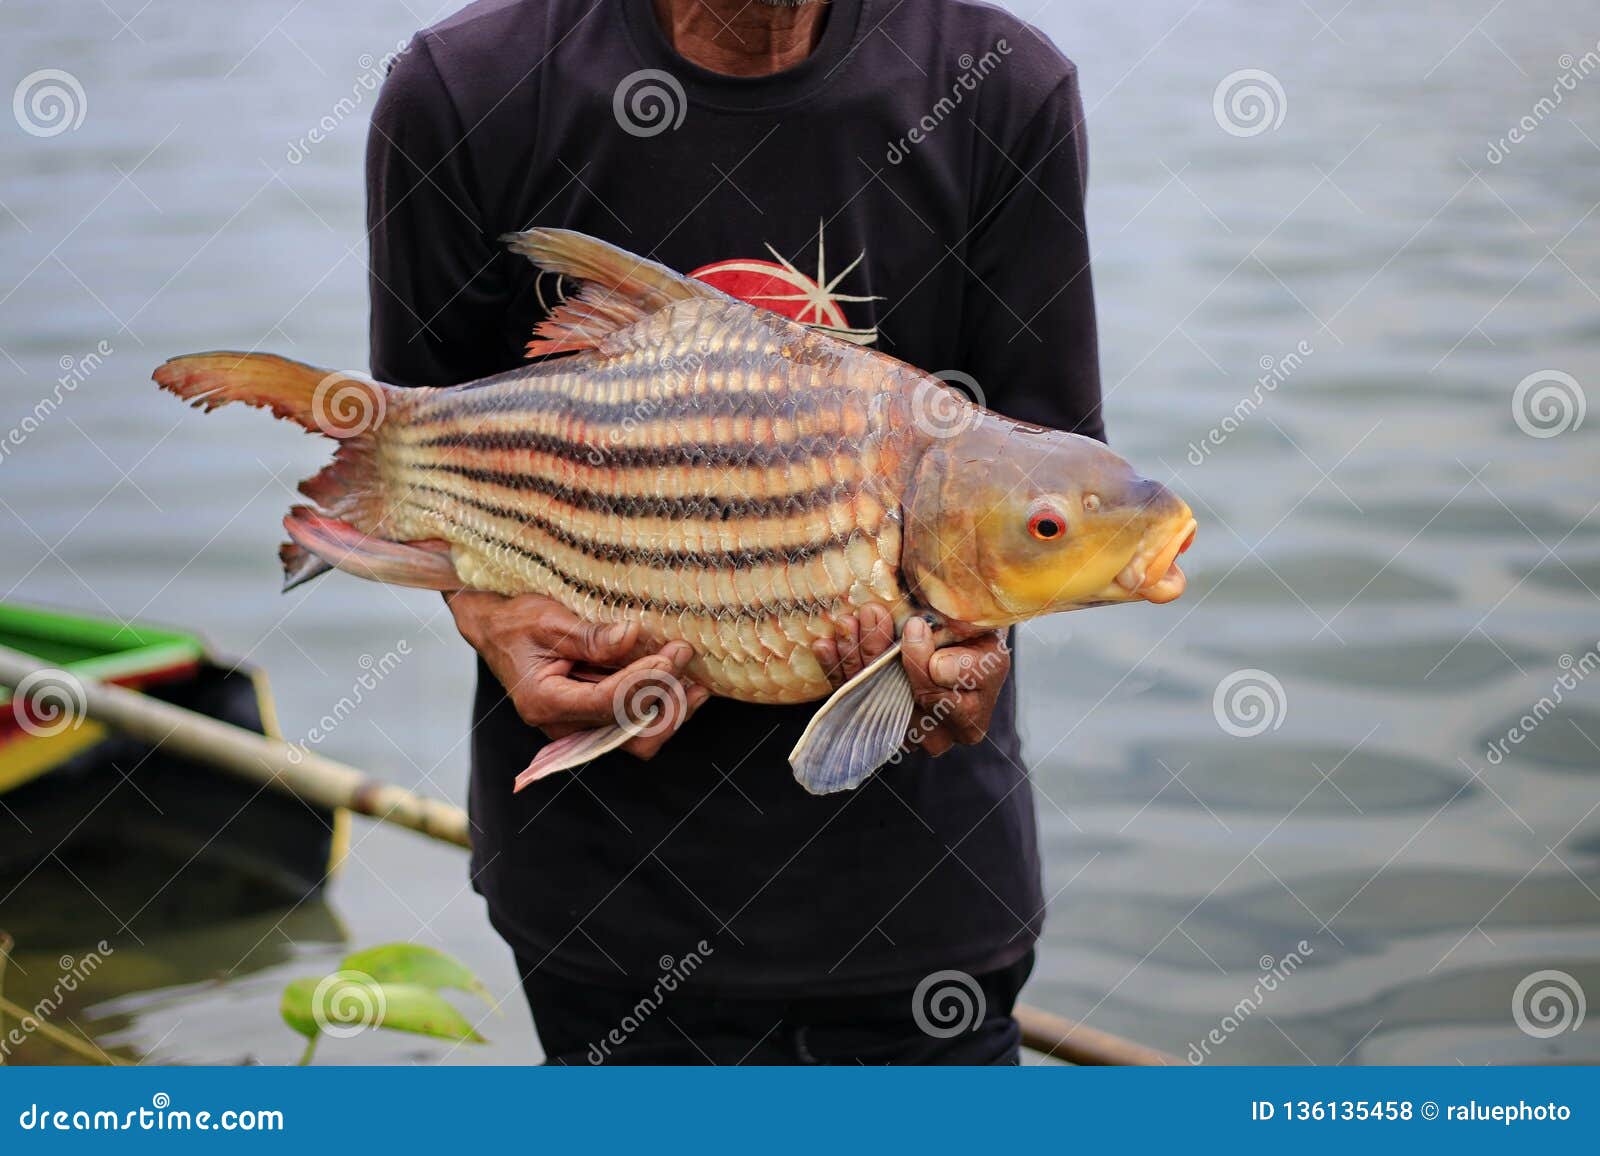 1,459 Fisherman Casting Net Stock Photos - Free & Royalty-Free Stock Photos  from Dreamstime - Page 11